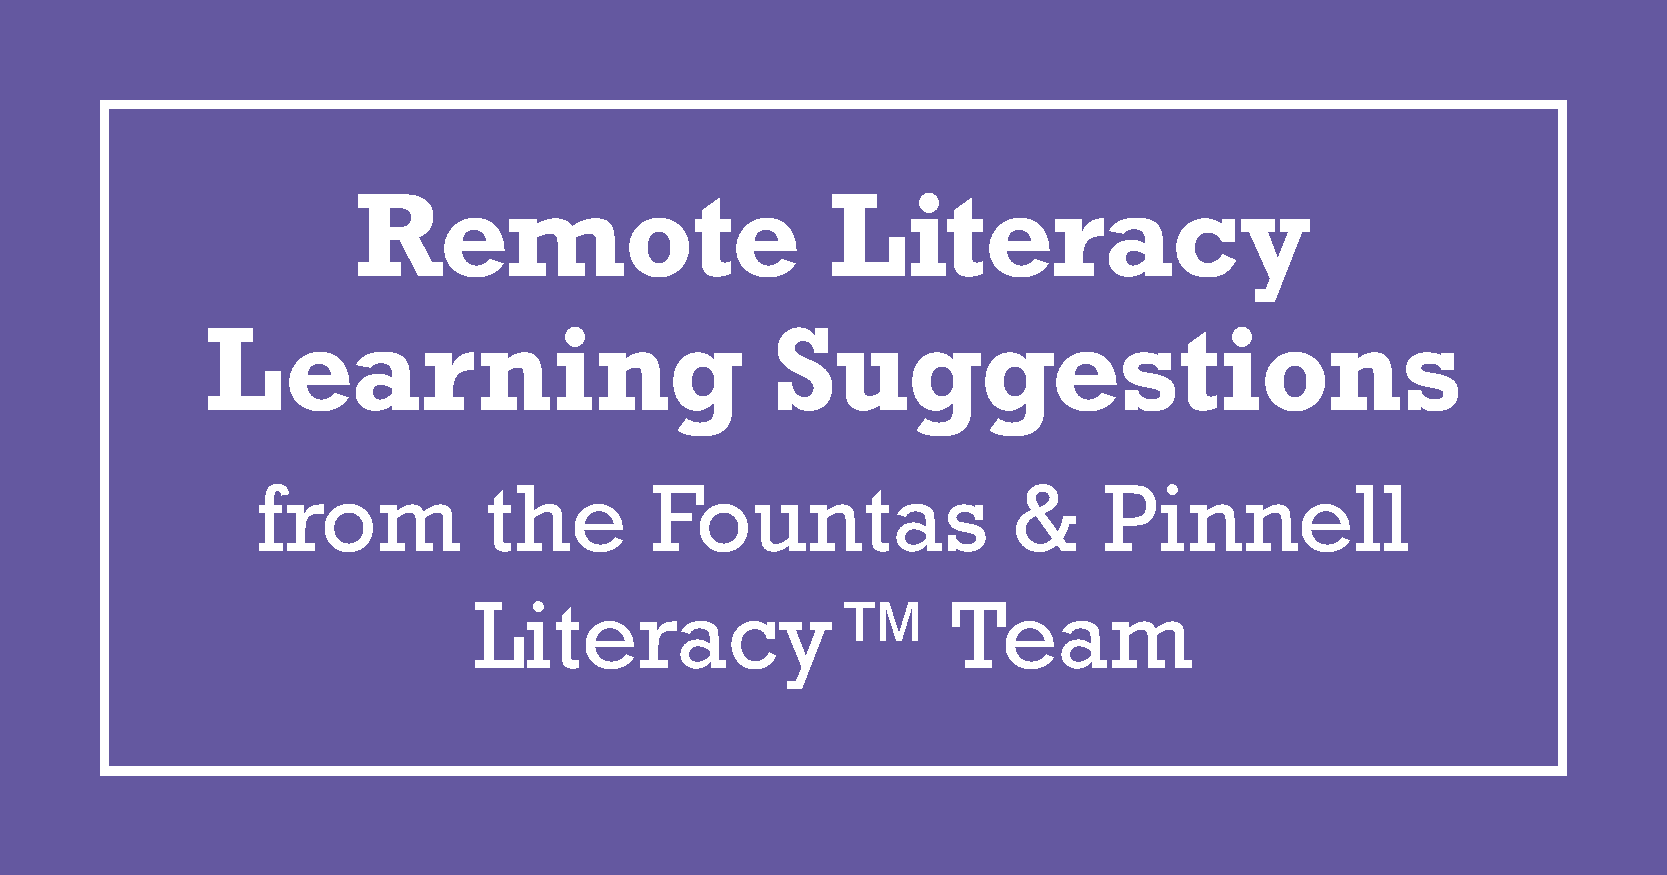 Remote Literacy Learning Suggestions from the Fountas & Pinnell Literacy™ Team